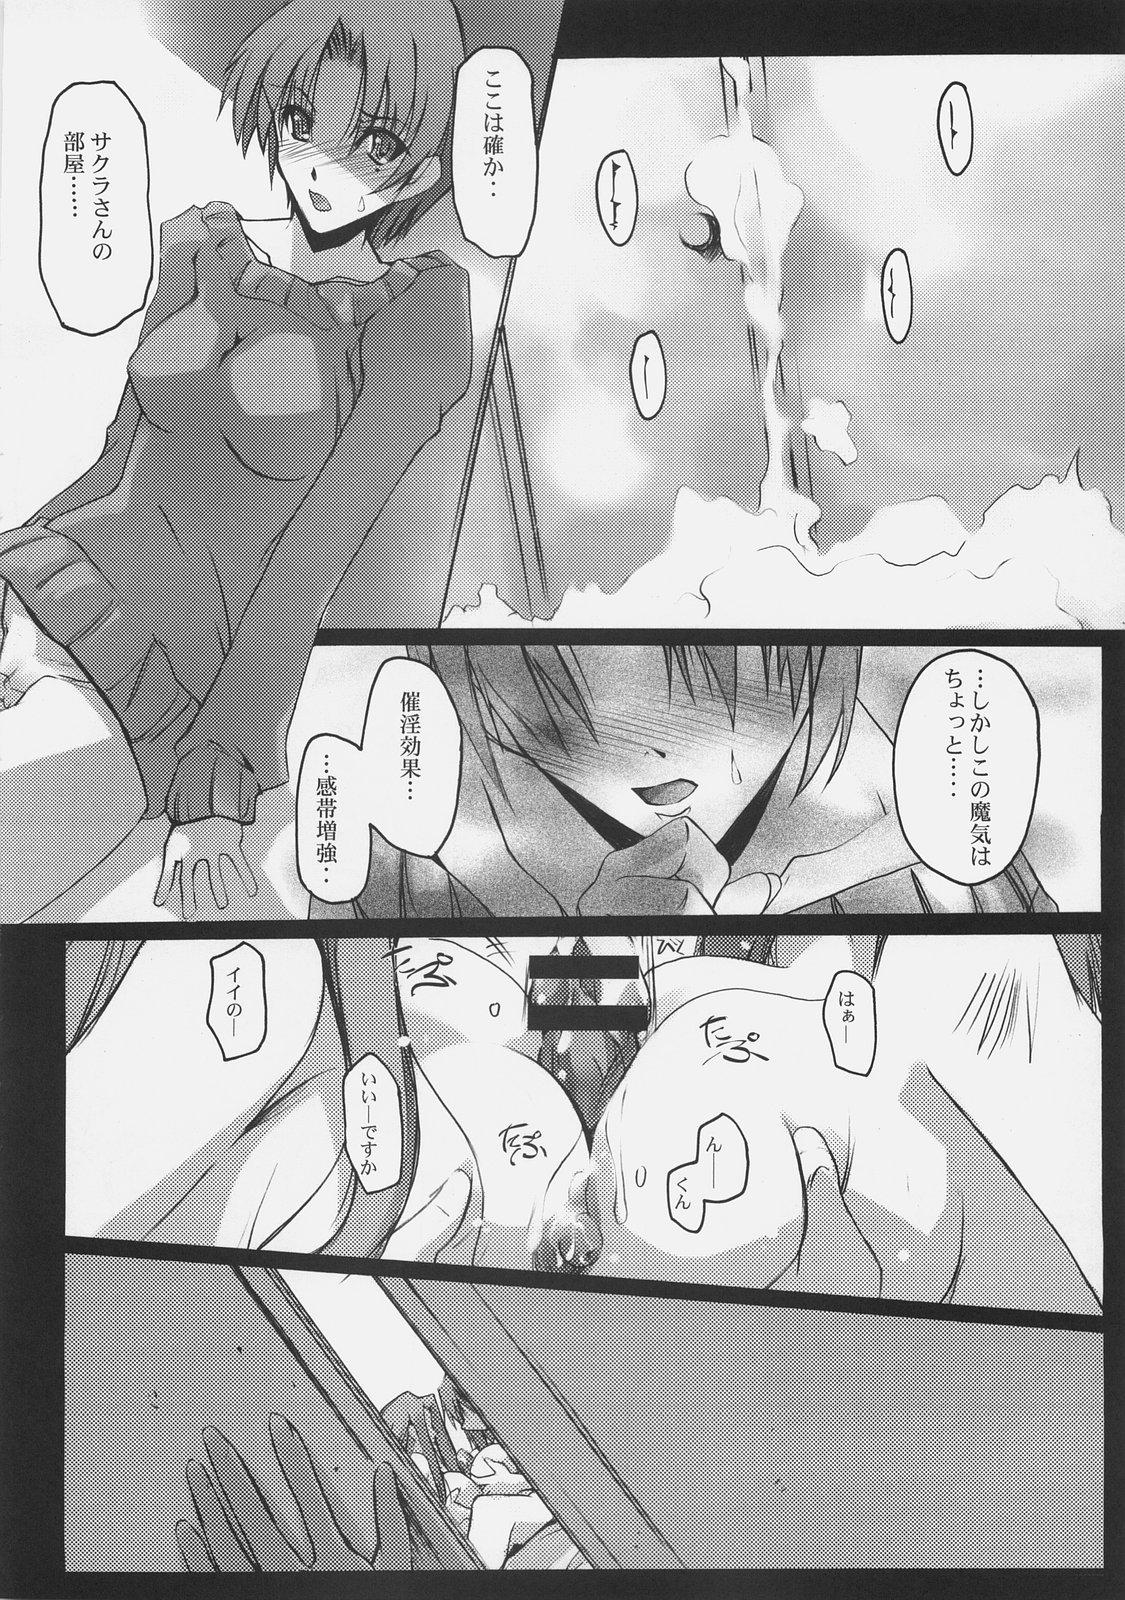 Colombiana After 4.5 day/dreamlike story - Fate stay night Fate hollow ataraxia Perra - Page 5